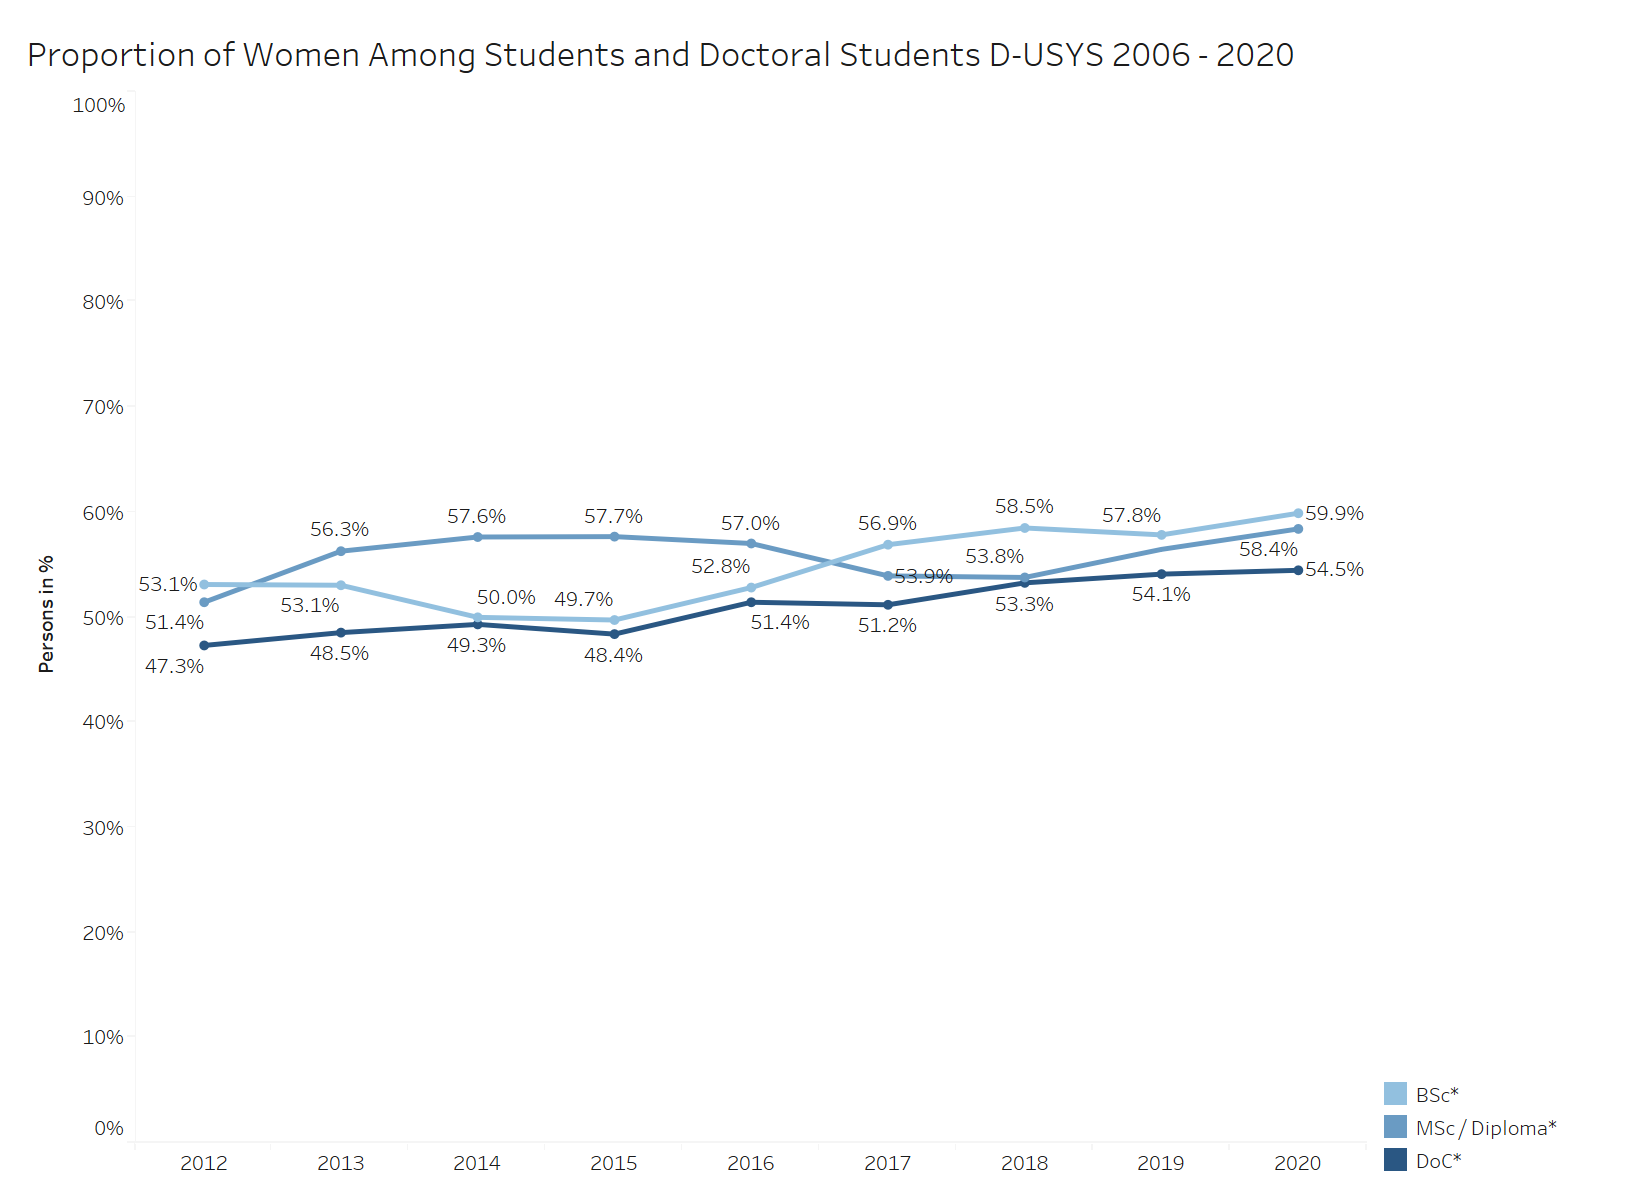 Proportion of Women Among Students and Doctoral Students D-USYS 2006 - 2020